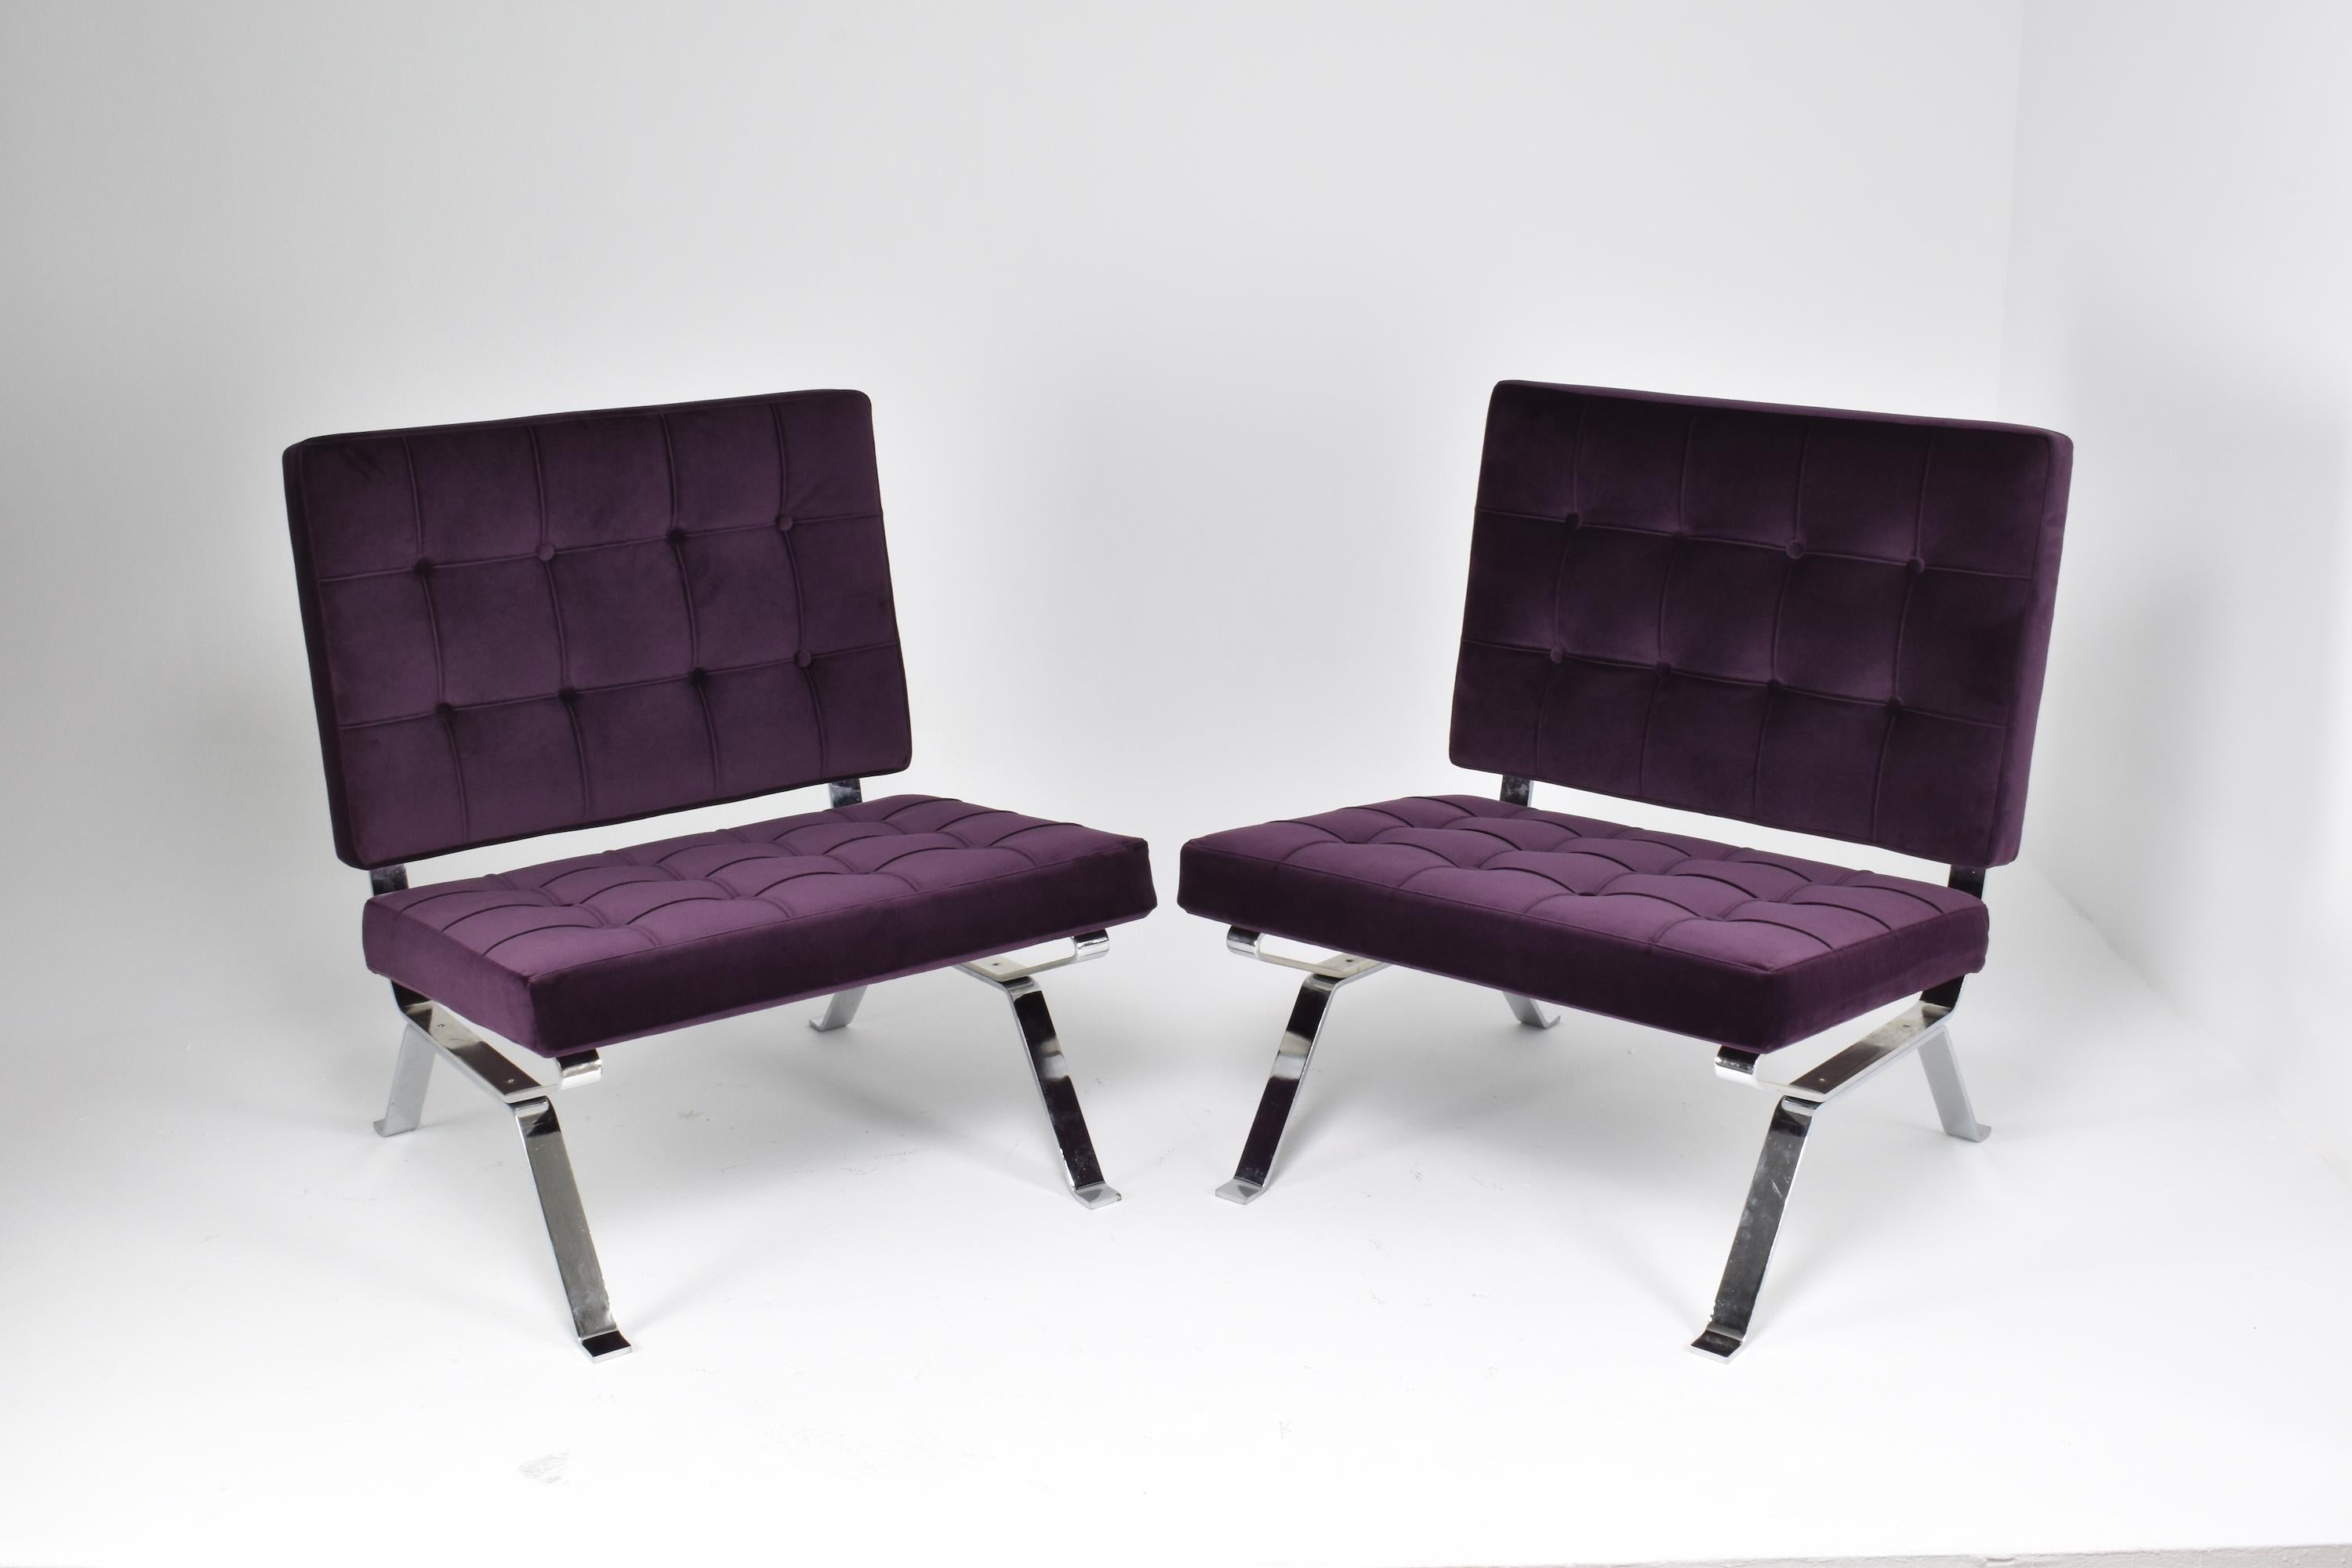 20th Century Pair of Italian Midcentury Dione Gastone Rinaldi Lounge Chairs, 1950s For Sale